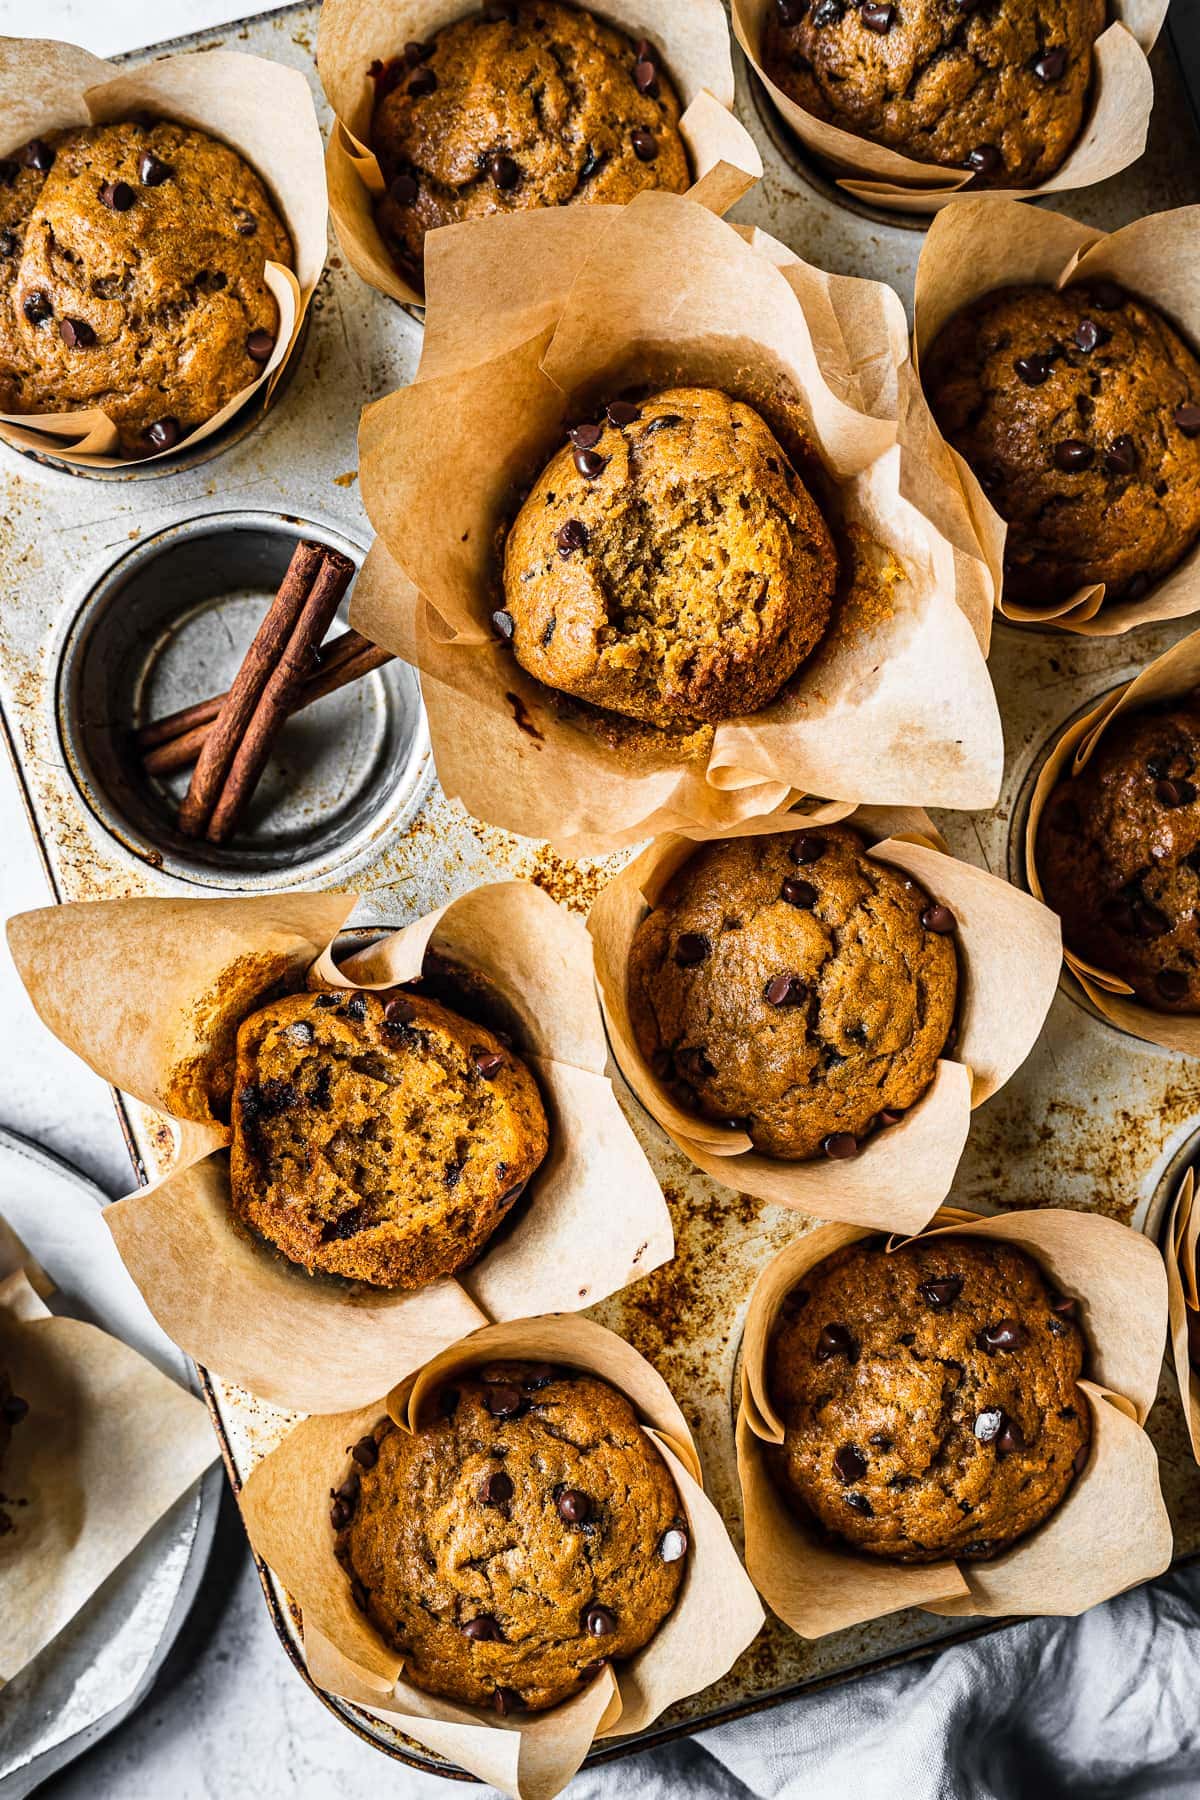 Baked pumpkin banana muffins in brown parchment liners in a muffin tin. One cavity is empty and holds two cinnamon sticks. The pan is on an angle and there are bites out of two muffins, revealing the inside texture.